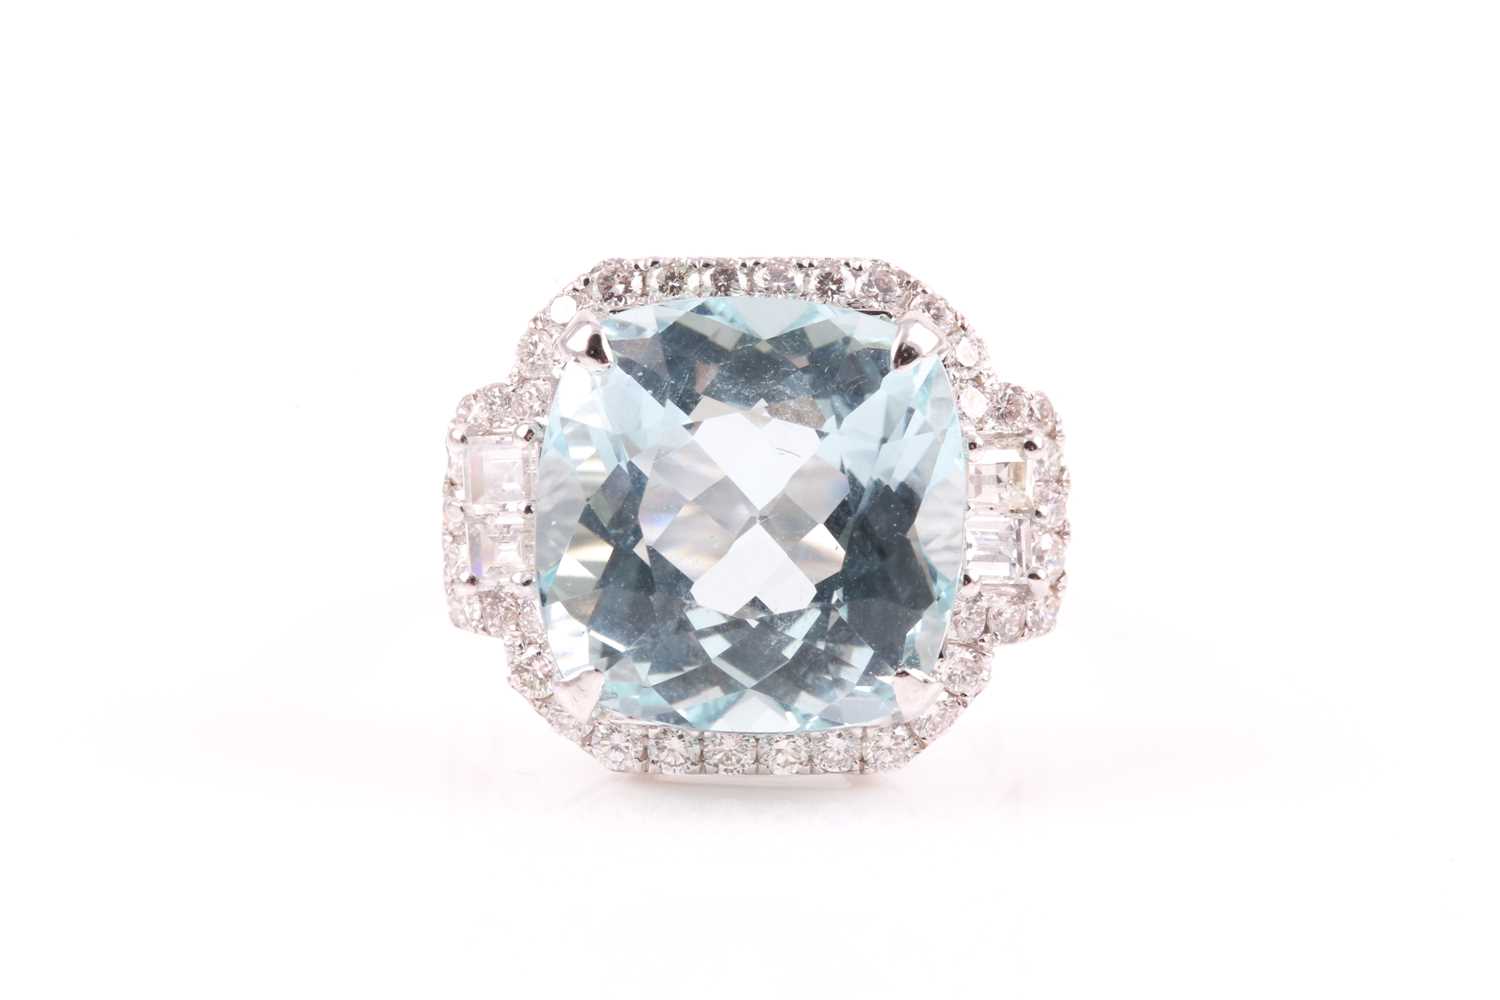 A diamond and aquamarine cocktail ring, set with a cushion-cut aquamarine of approximately 9.90